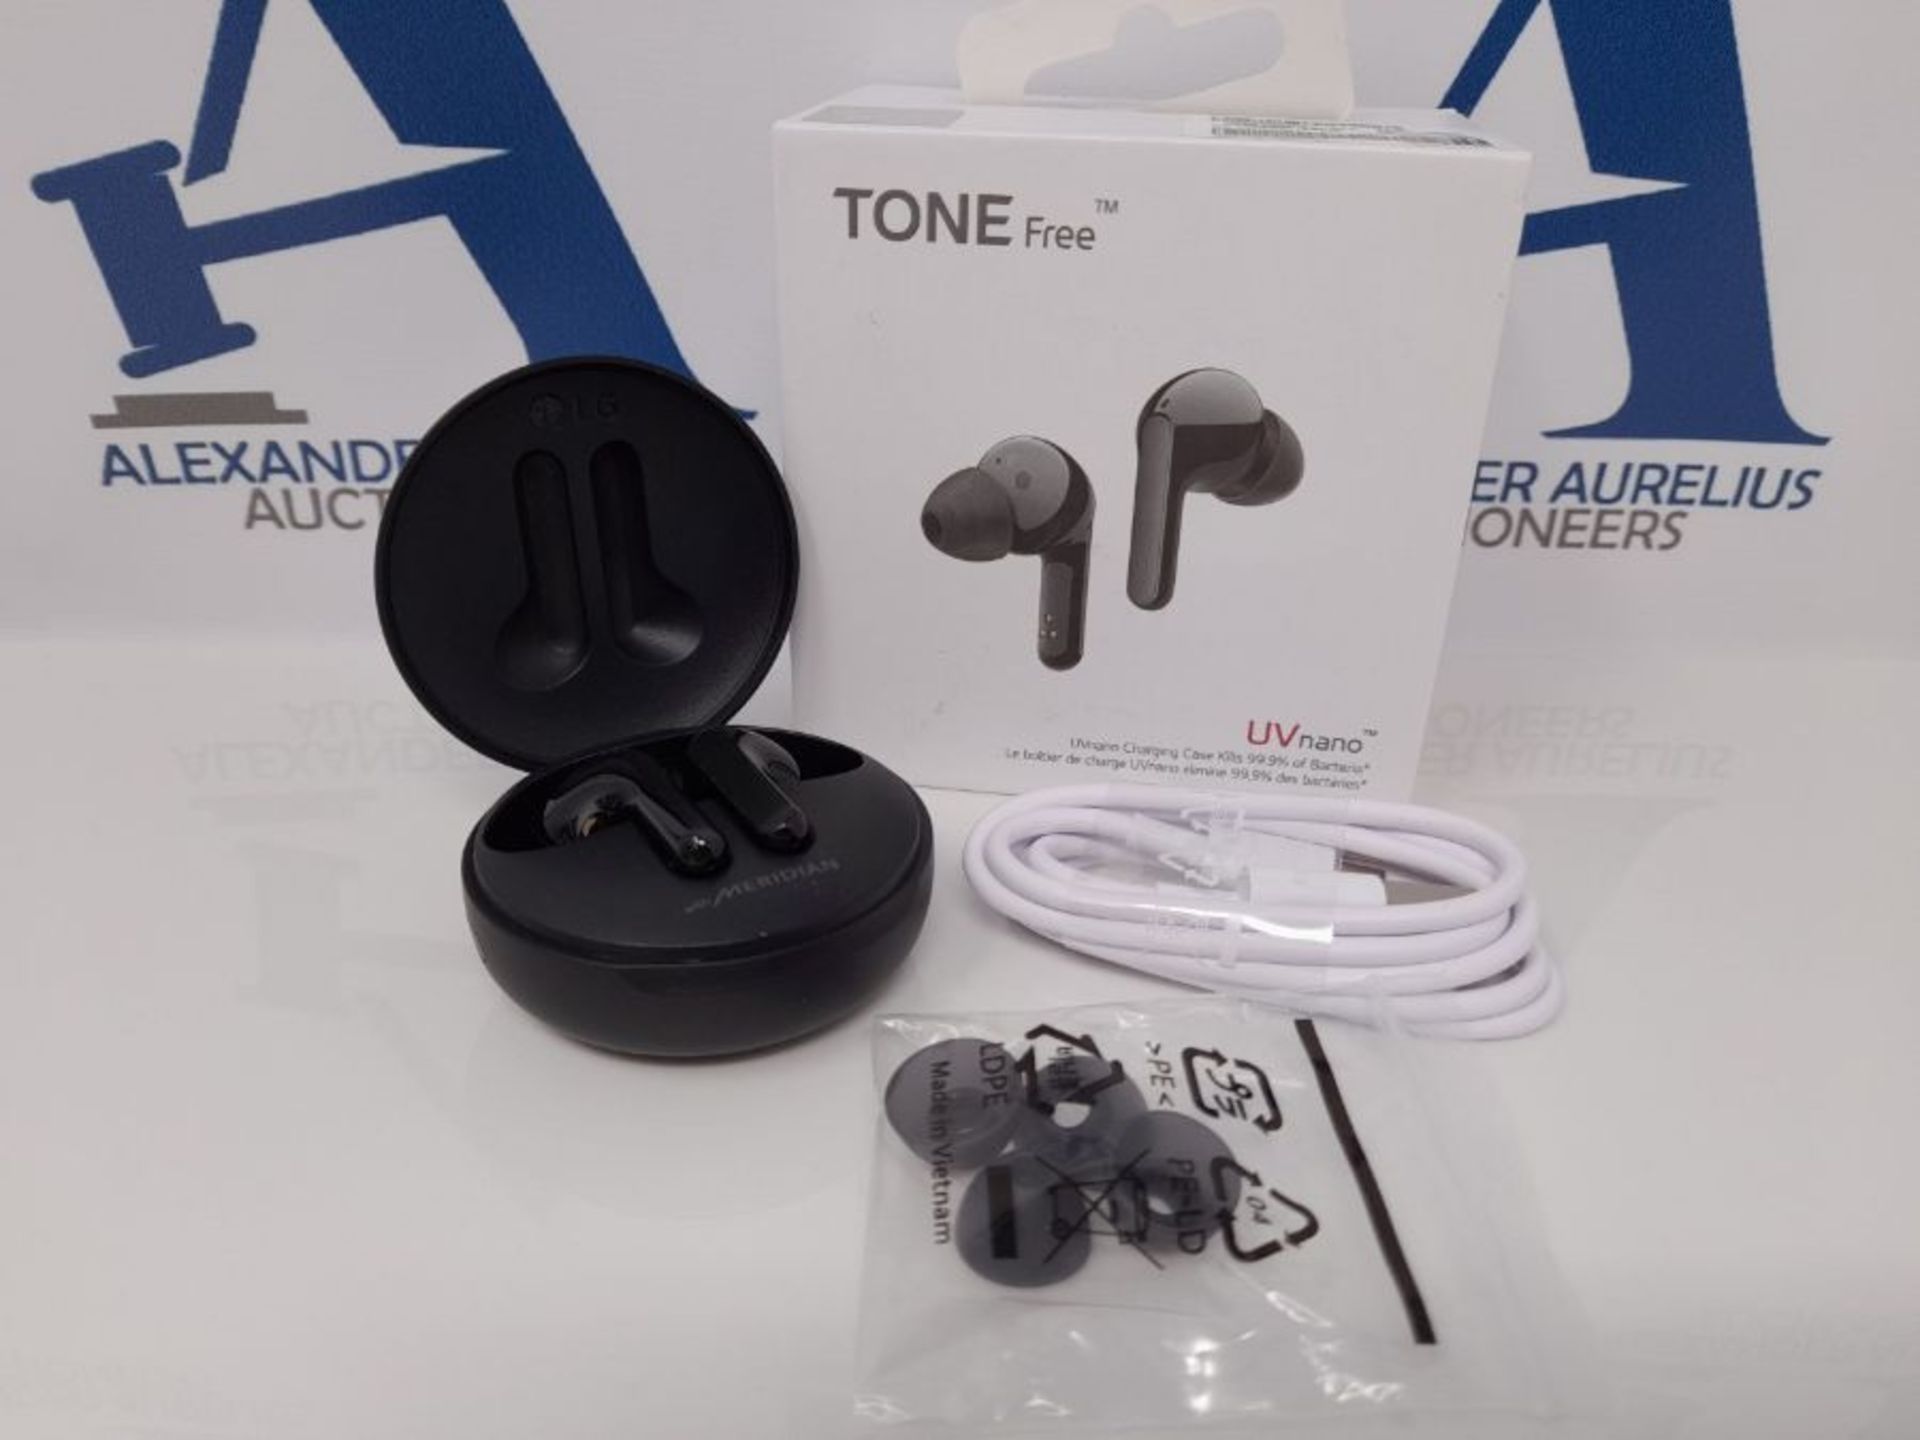 RRP £78.00 LG TONE Free FN6 True Wireless Bluetooth Earbuds with UVNano Wireless Charging Case, W - Image 2 of 3